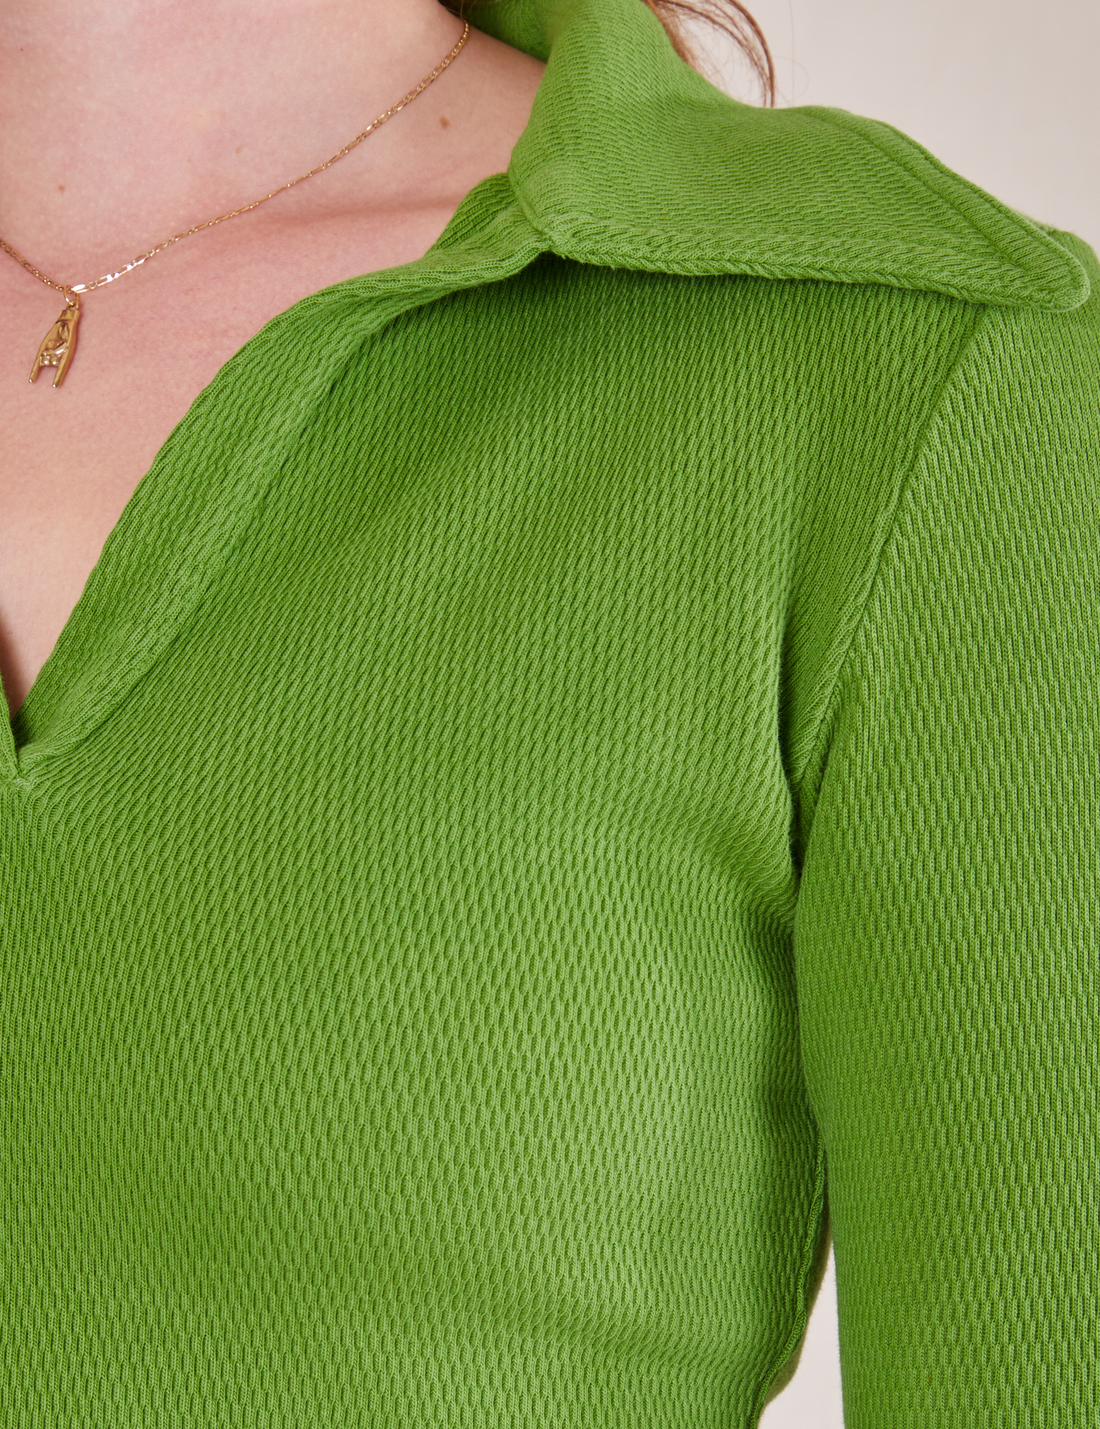 Long Sleeve Fisherman Polo in Bright Olive front close up on Alex